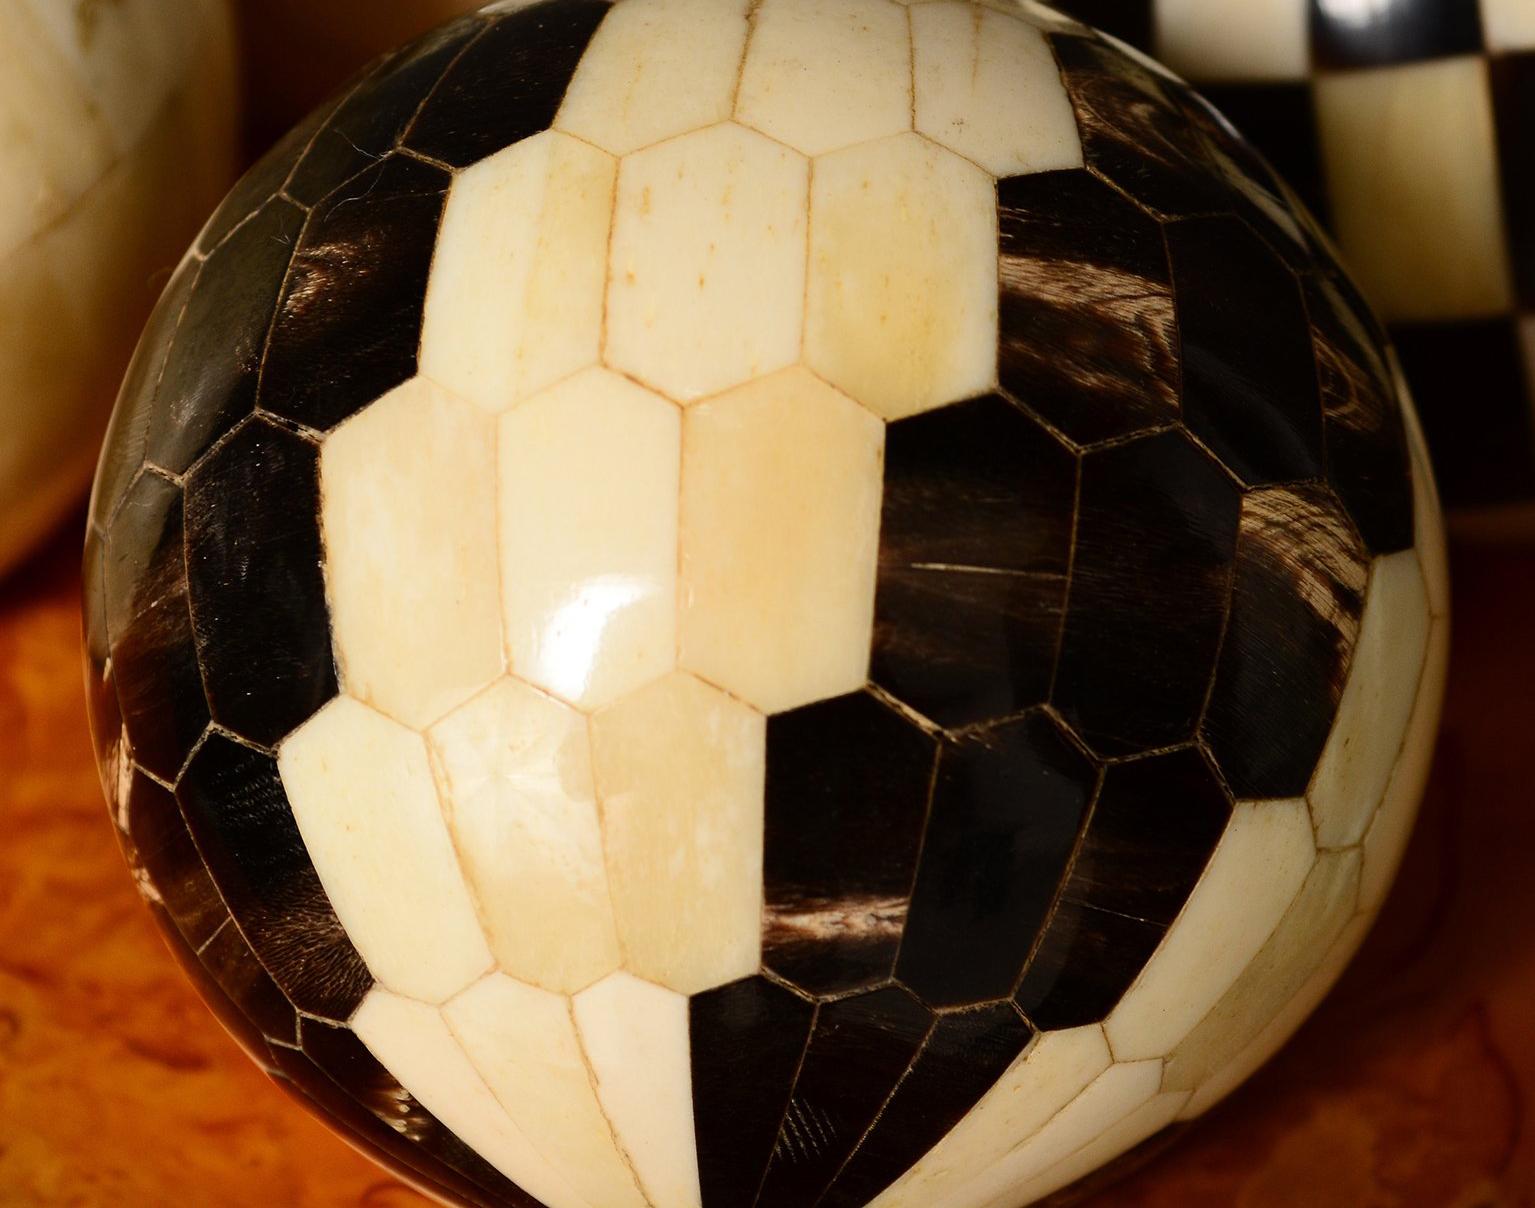 Late 20th Century Decorative Tessellated Spheres Set, Bone and Horn with Burl Wood Tray